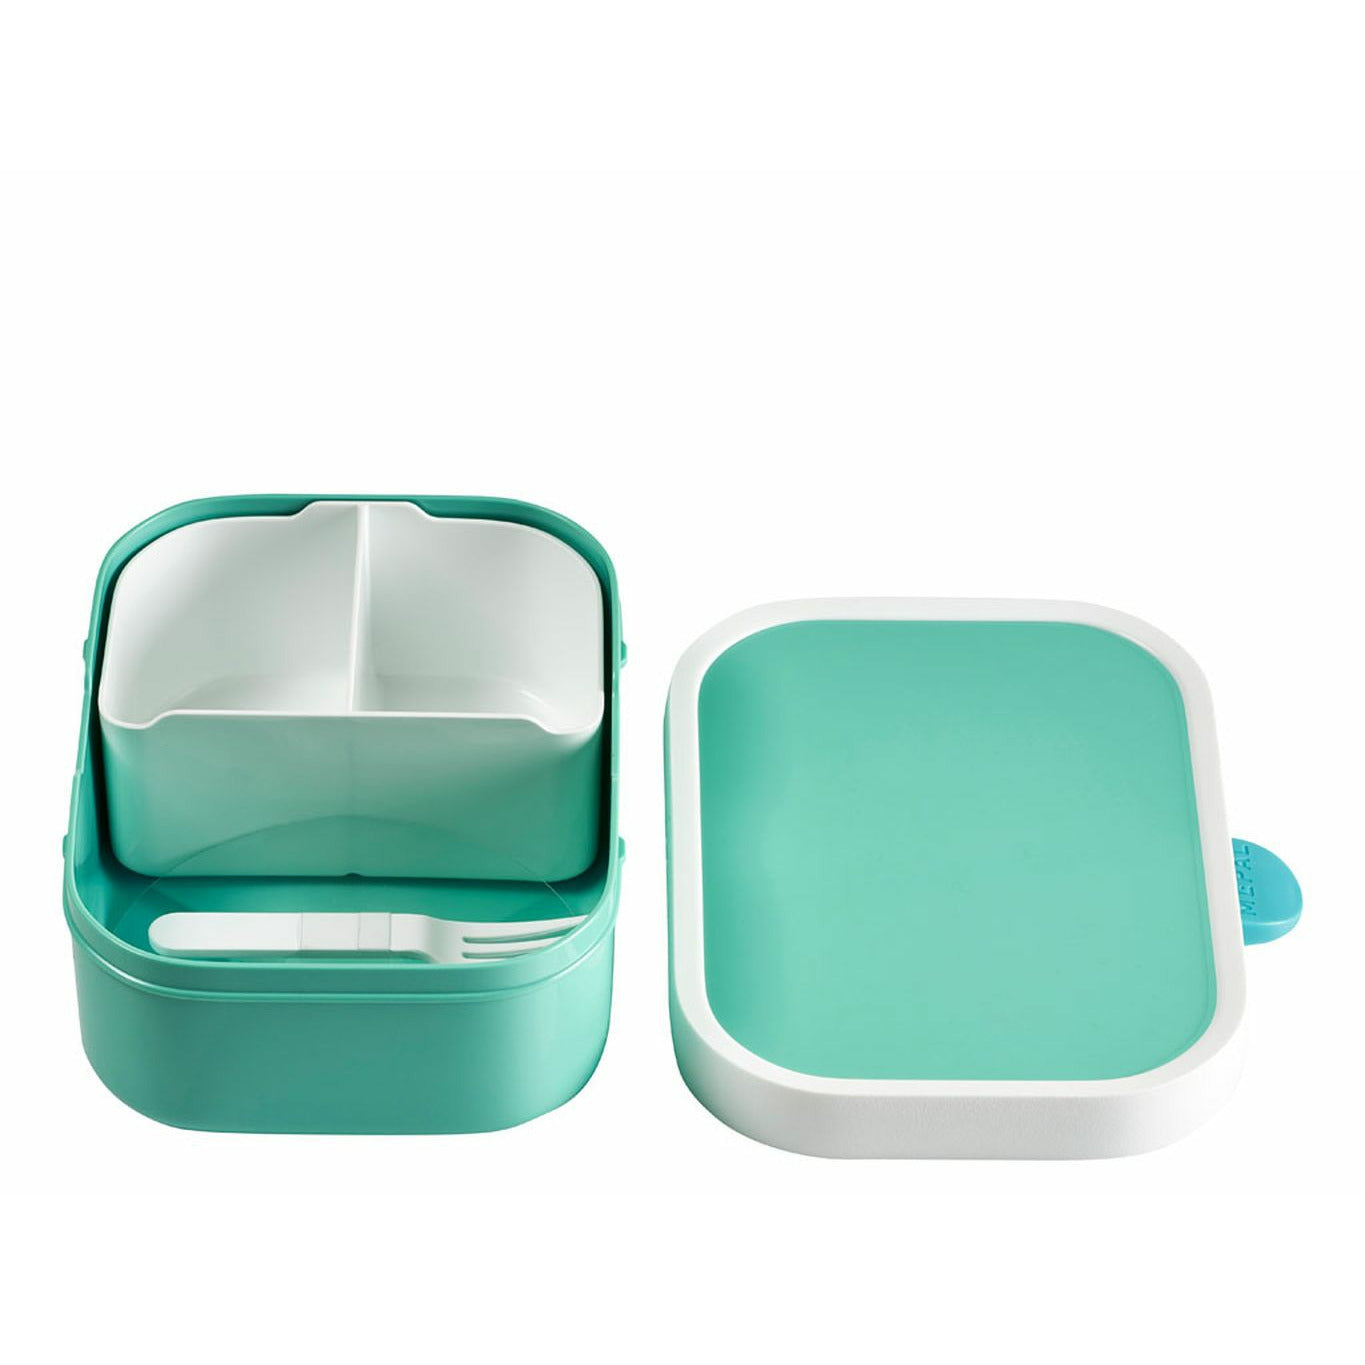 Mepal Campus Campus Lunch Box, Turquoise